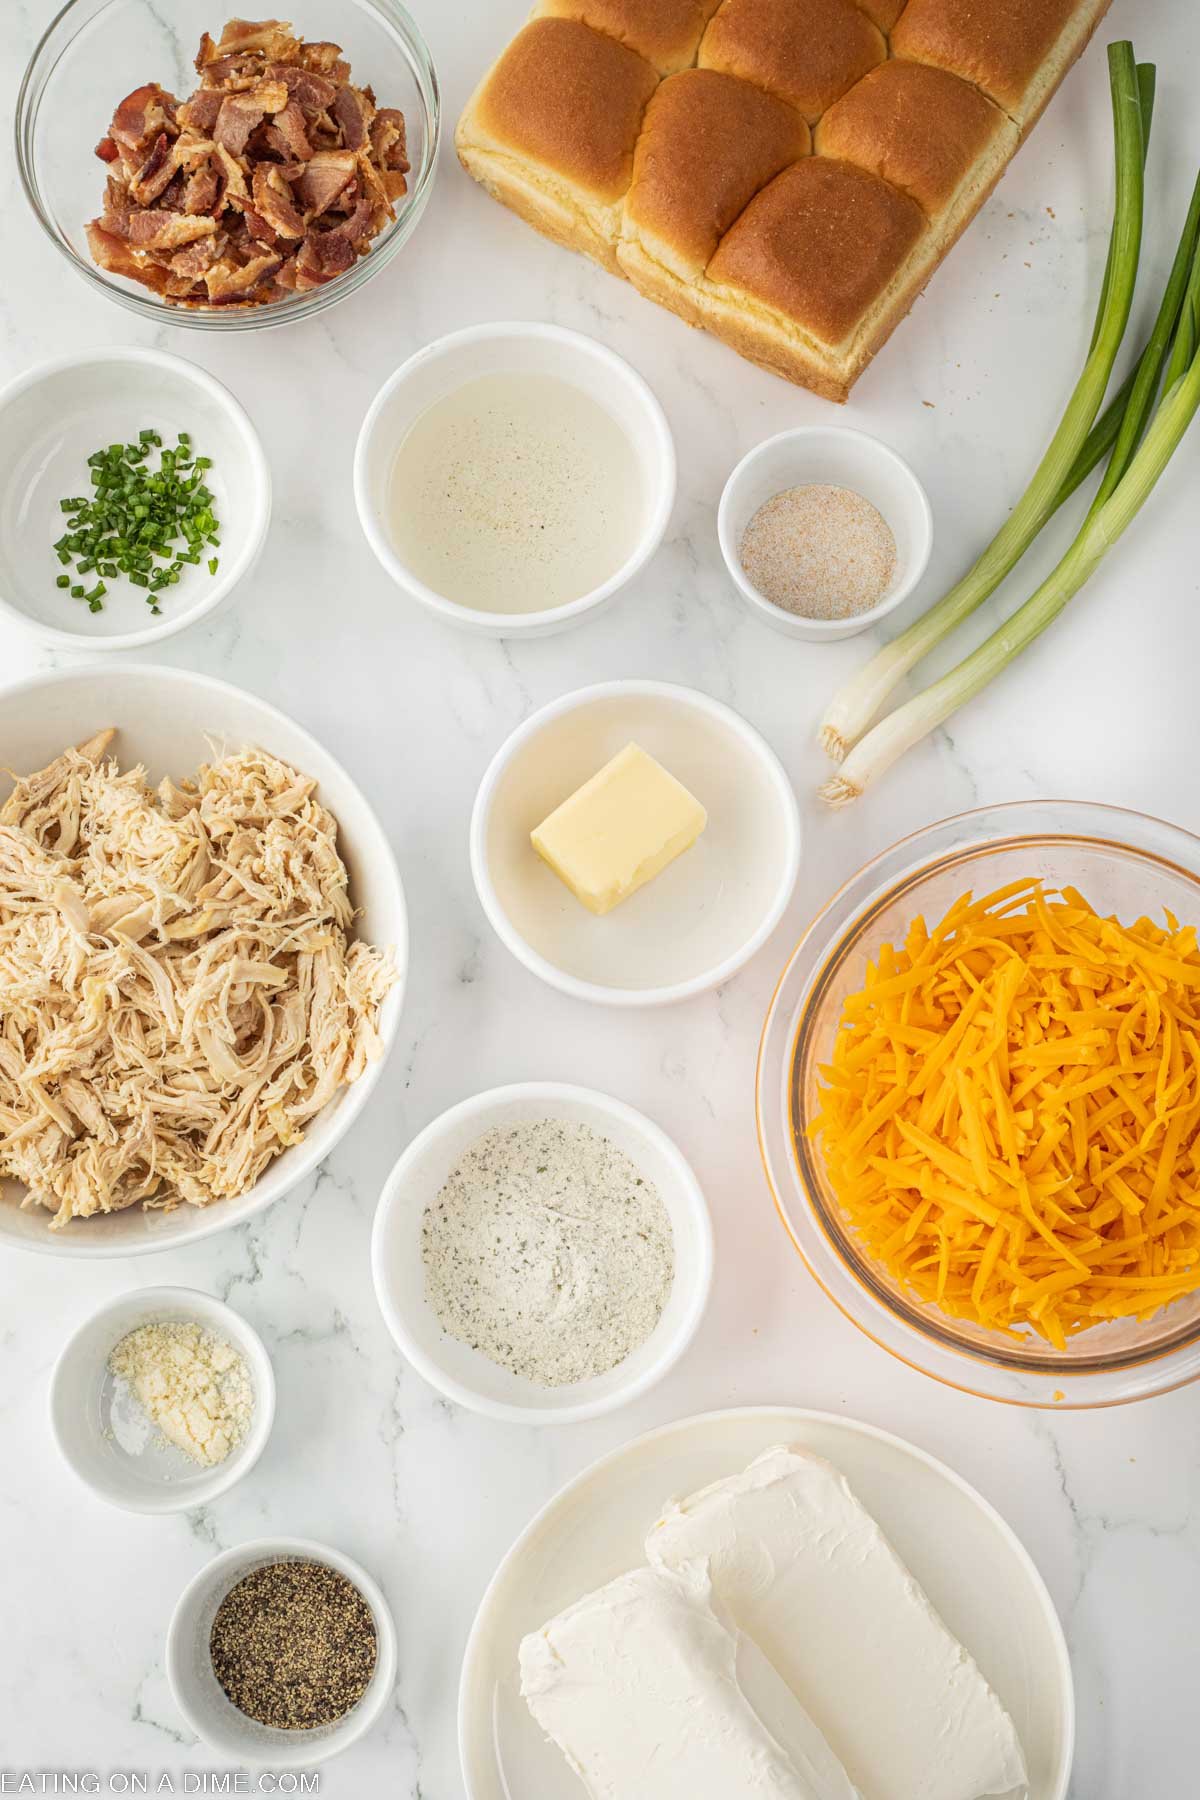 Ingredients needed - chicken breast, cream cheese, ranch dressing mix, black pepper, bacon, chicken broth, cheddar cheese, green onions, hawaiian rolls, butter, garlic salt, parmesan cheese, chives